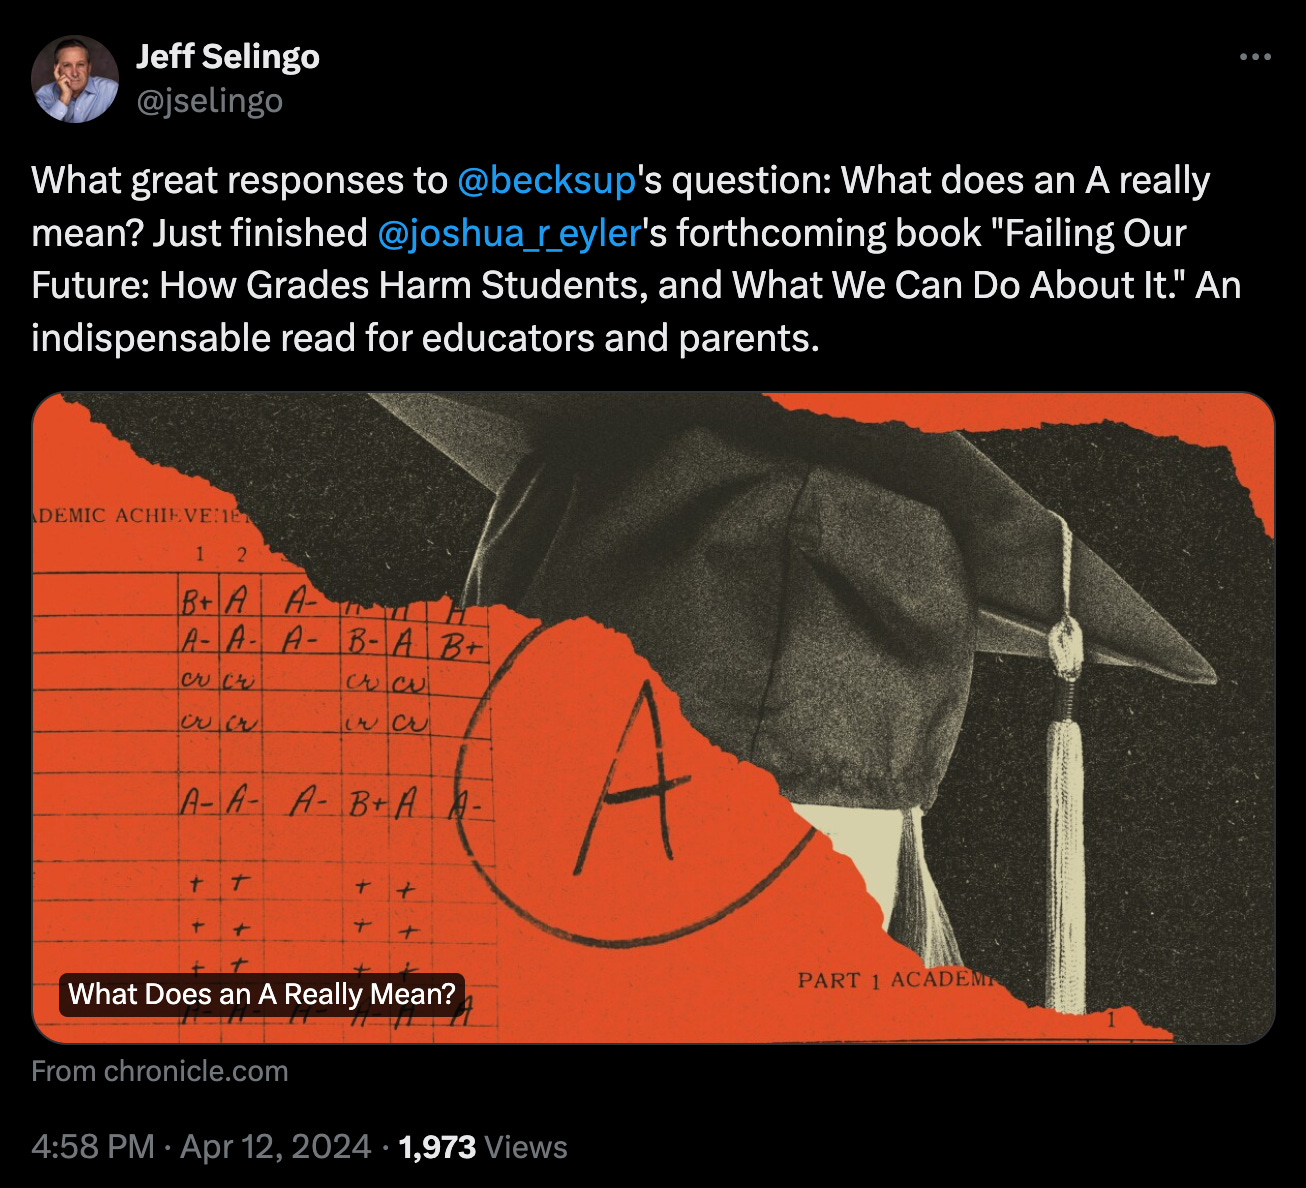 Twitter post from Jeff Selingo that says, "What great responses to  @becksup 's question: What does an A really mean? Just finished  @joshua_r_eyler 's forthcoming book "Failing Our Future: How Grades Harm Students, and What We Can Do About It." An indispensable read for educators and parents."